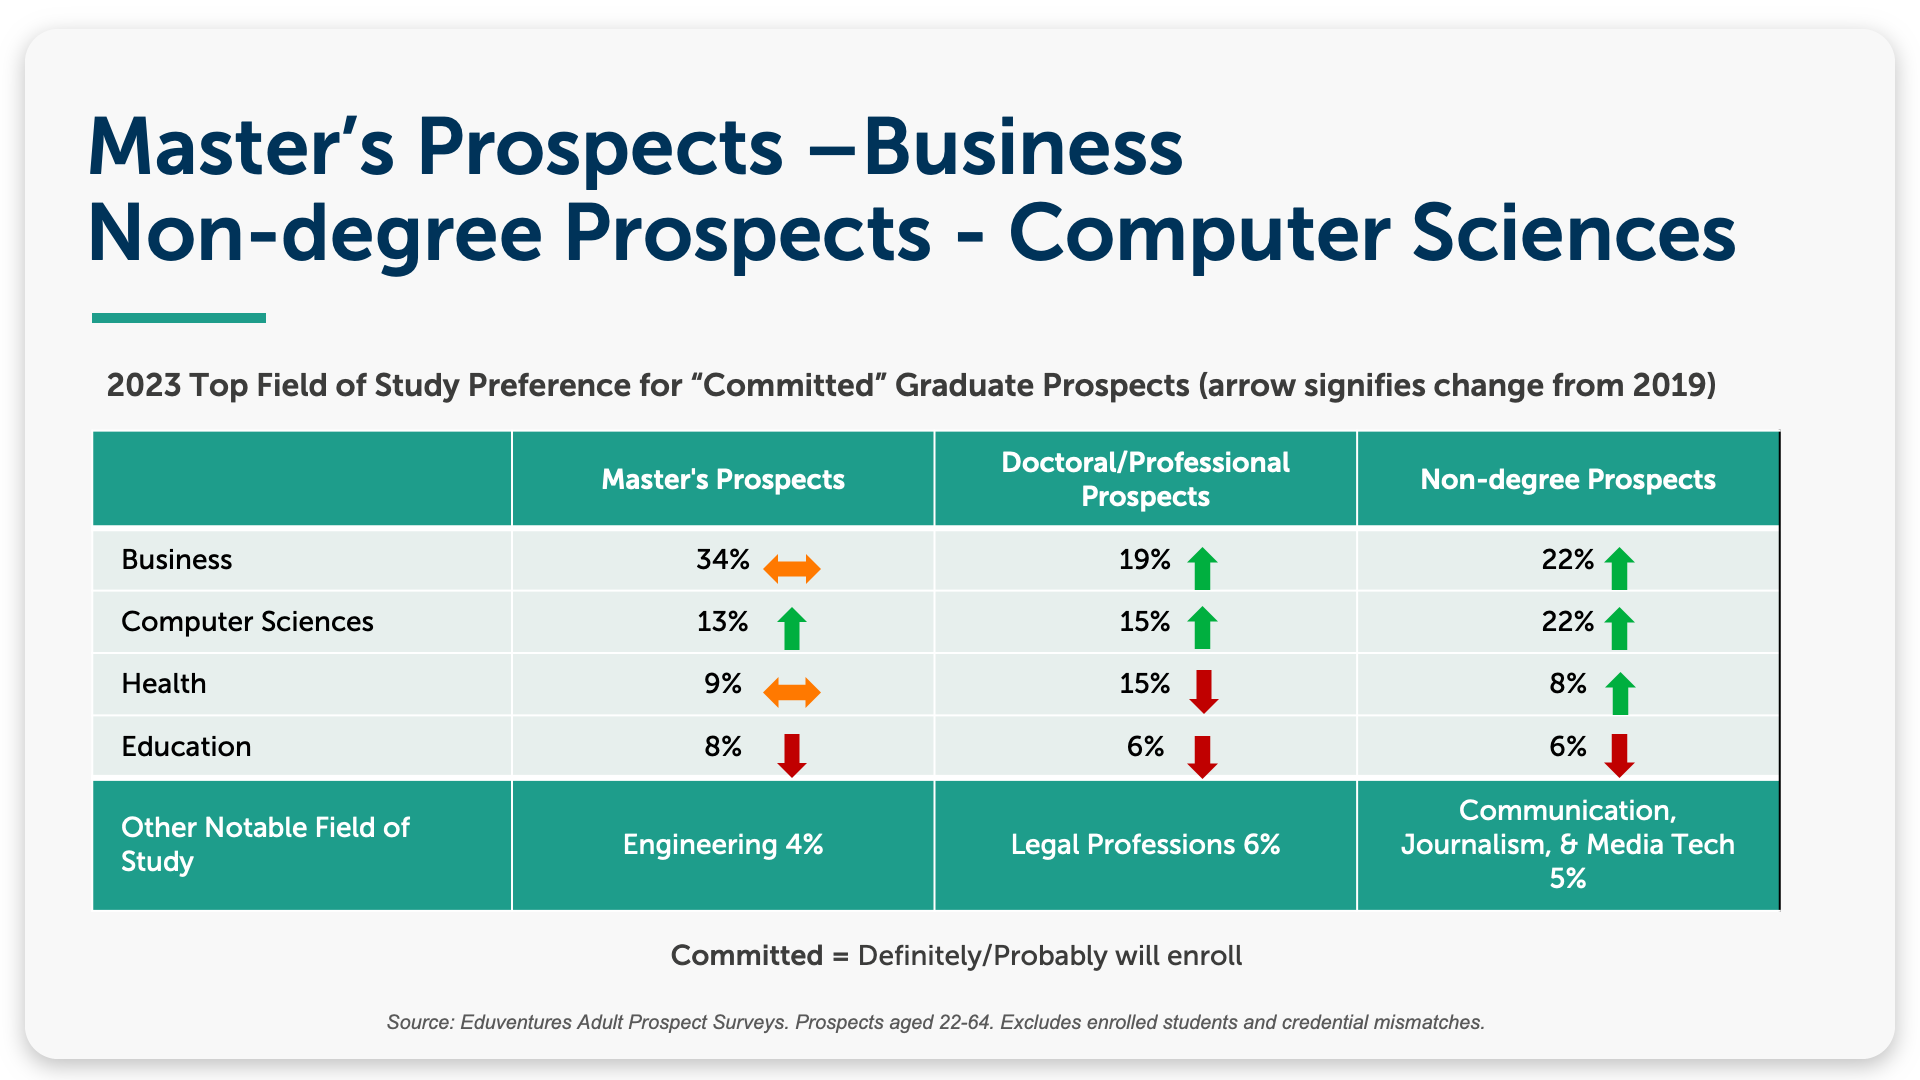 Master's Prospects - Business Non-degree Prospects - Computer Sciences